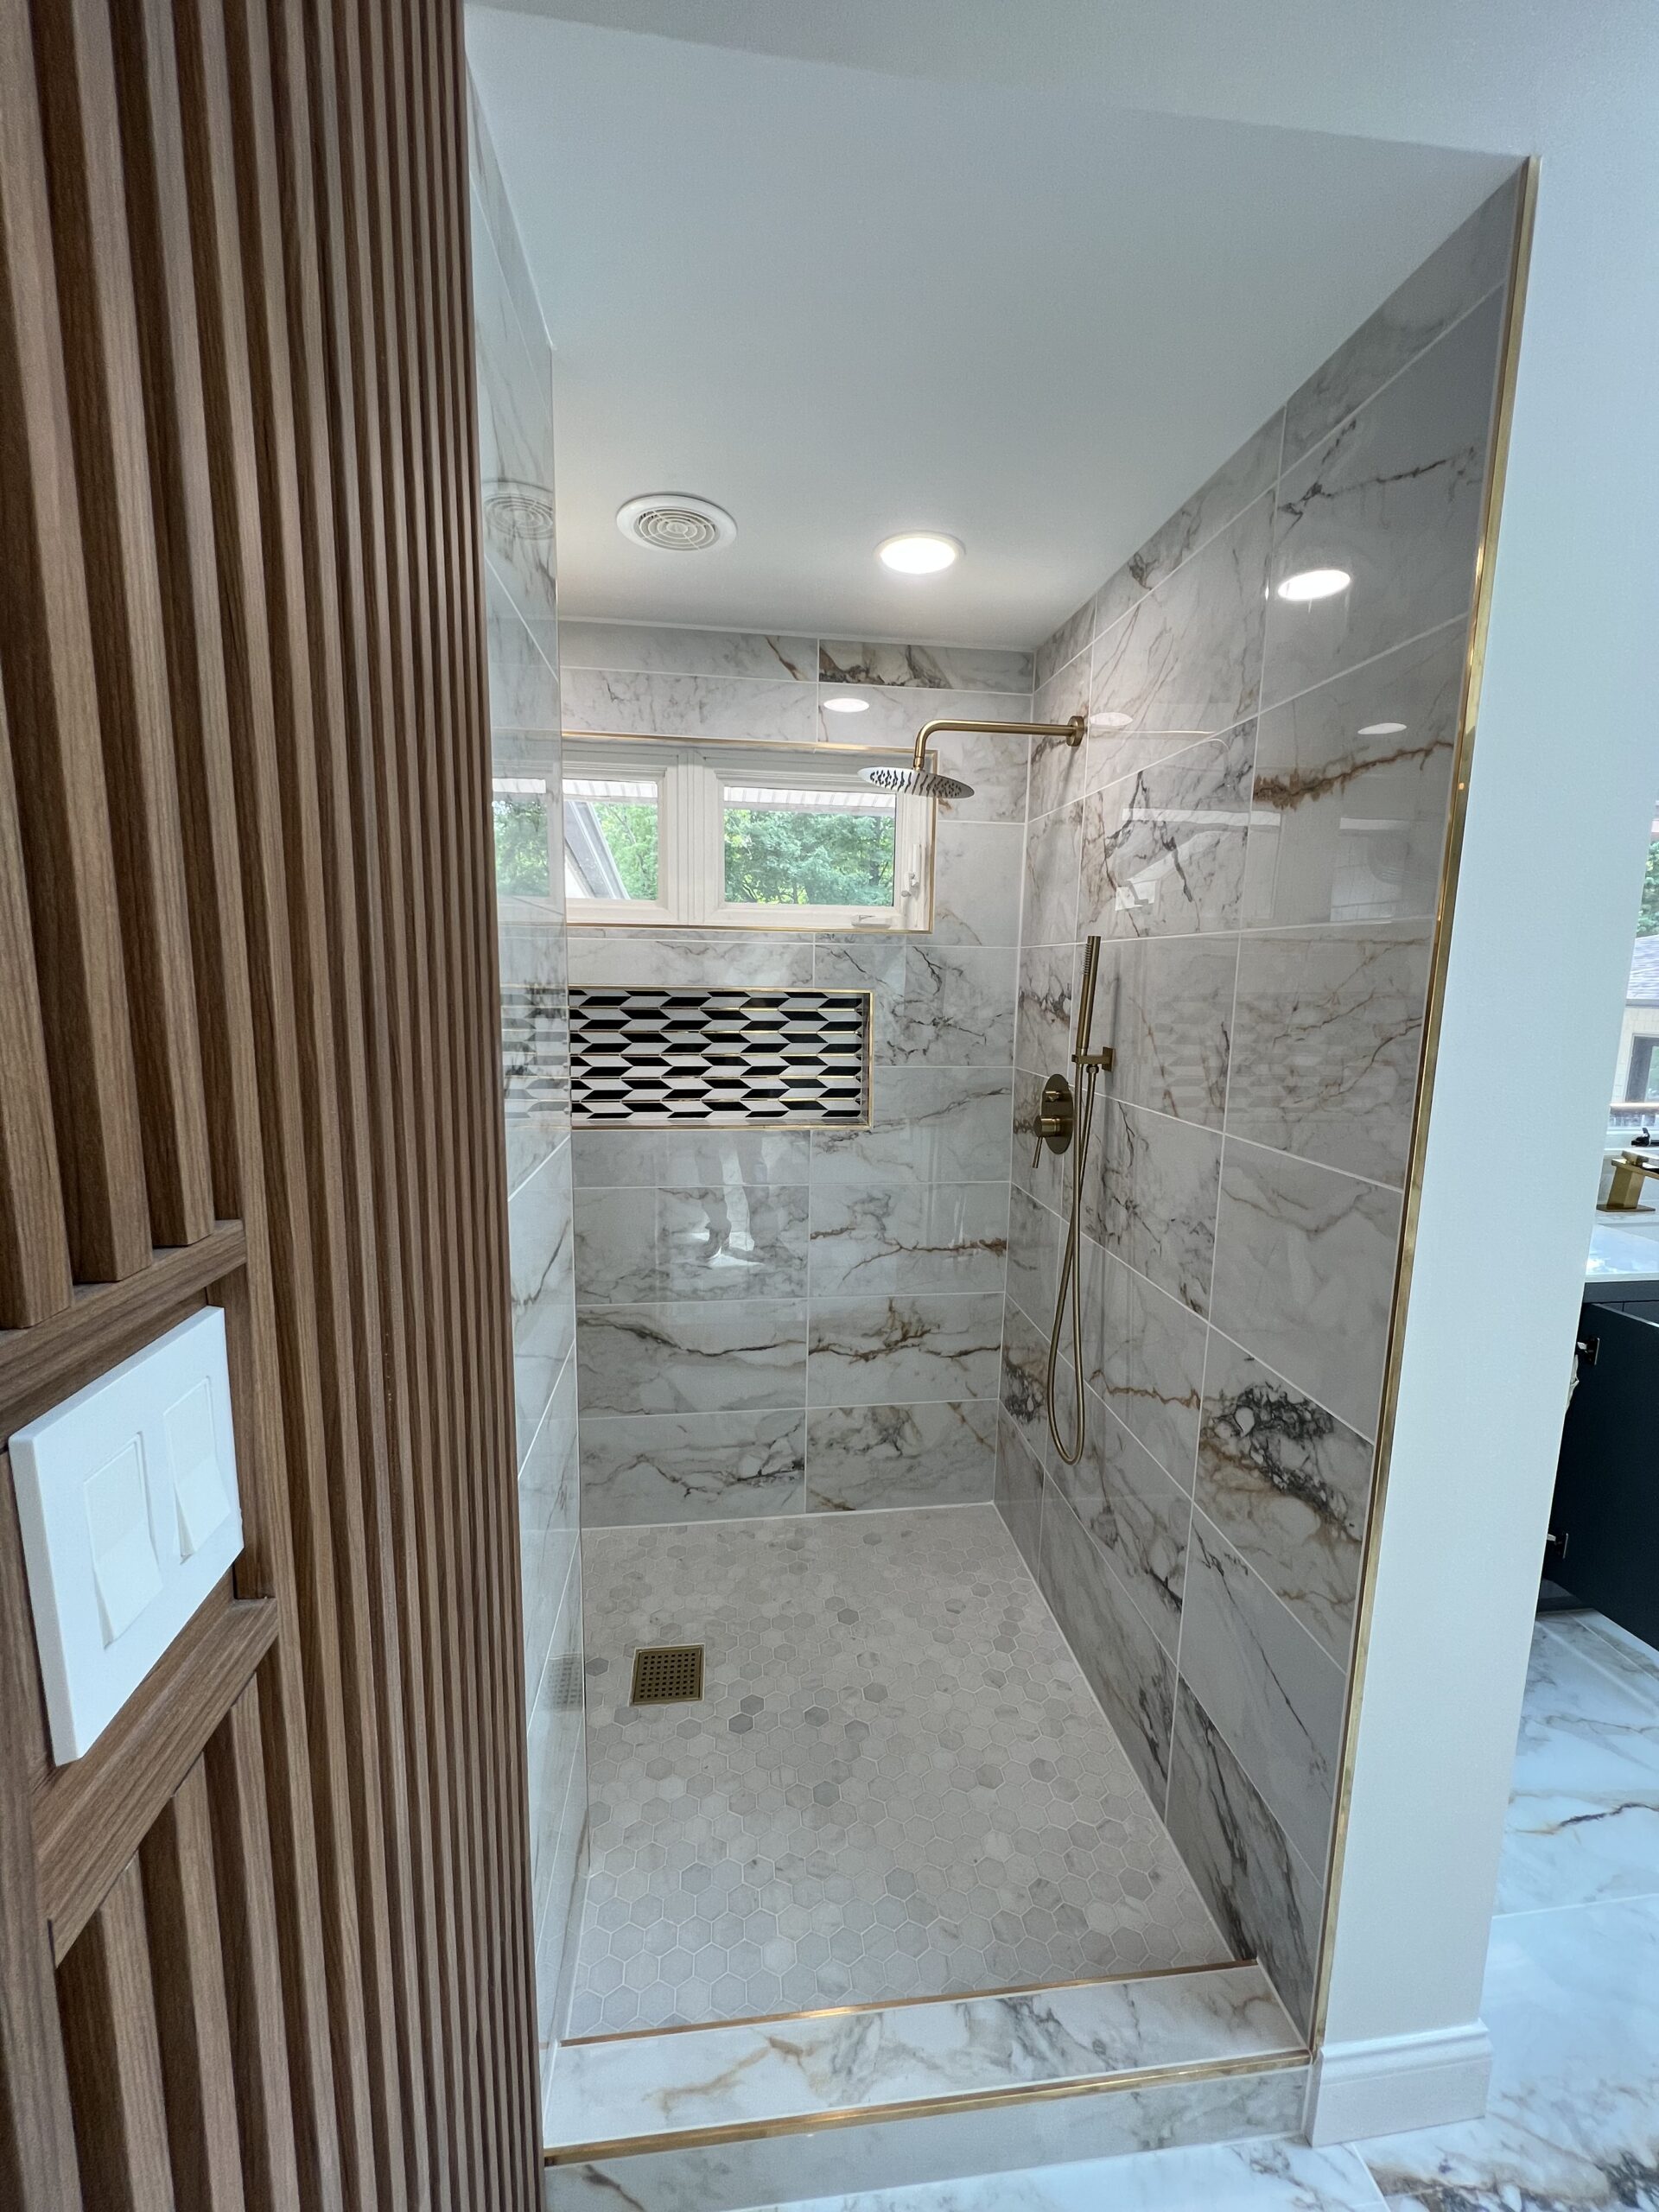 Residential shower, black and white tile, marble tile, with rainfall showerhead. From a view that shows shelf space